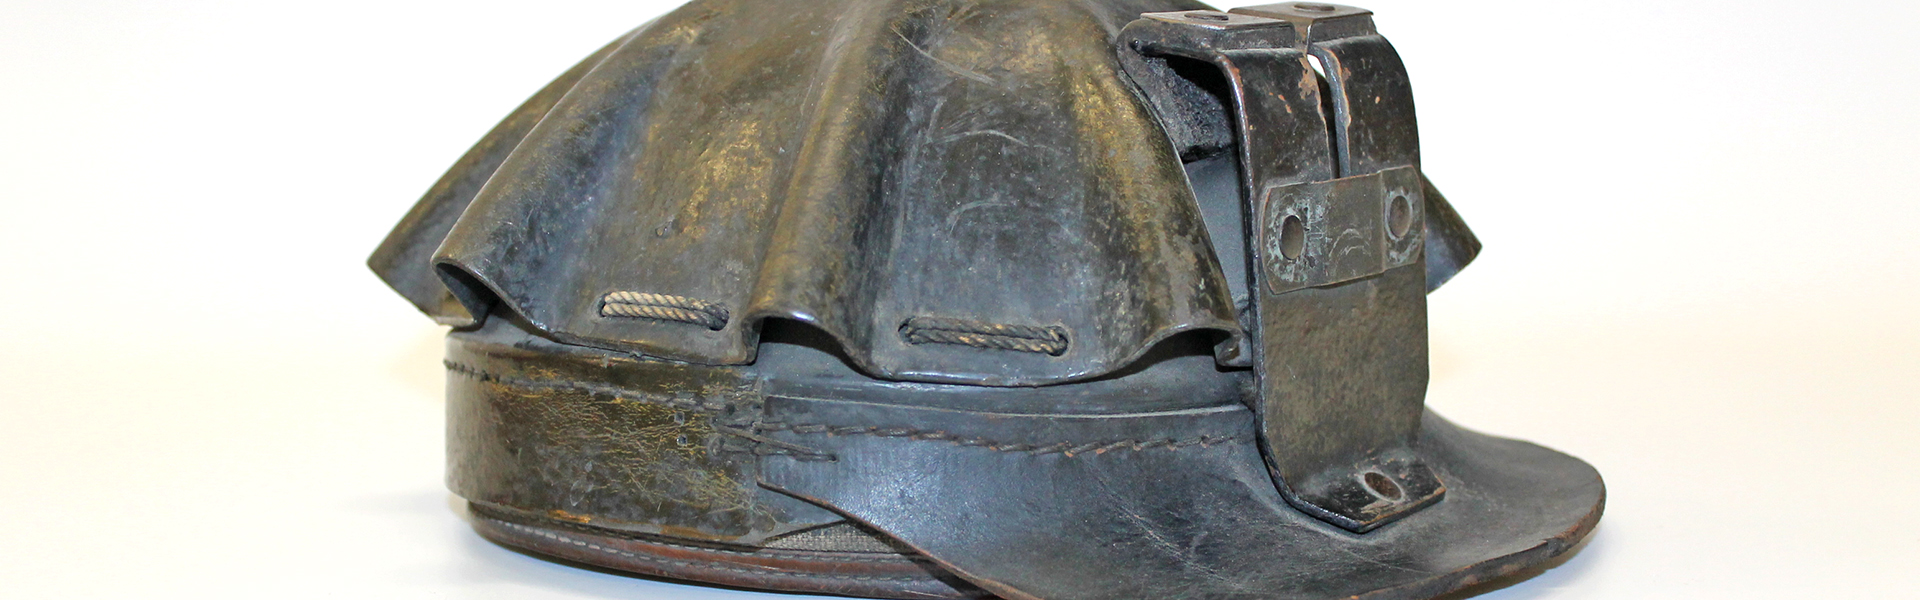 close up of a 20th century mining hard hat